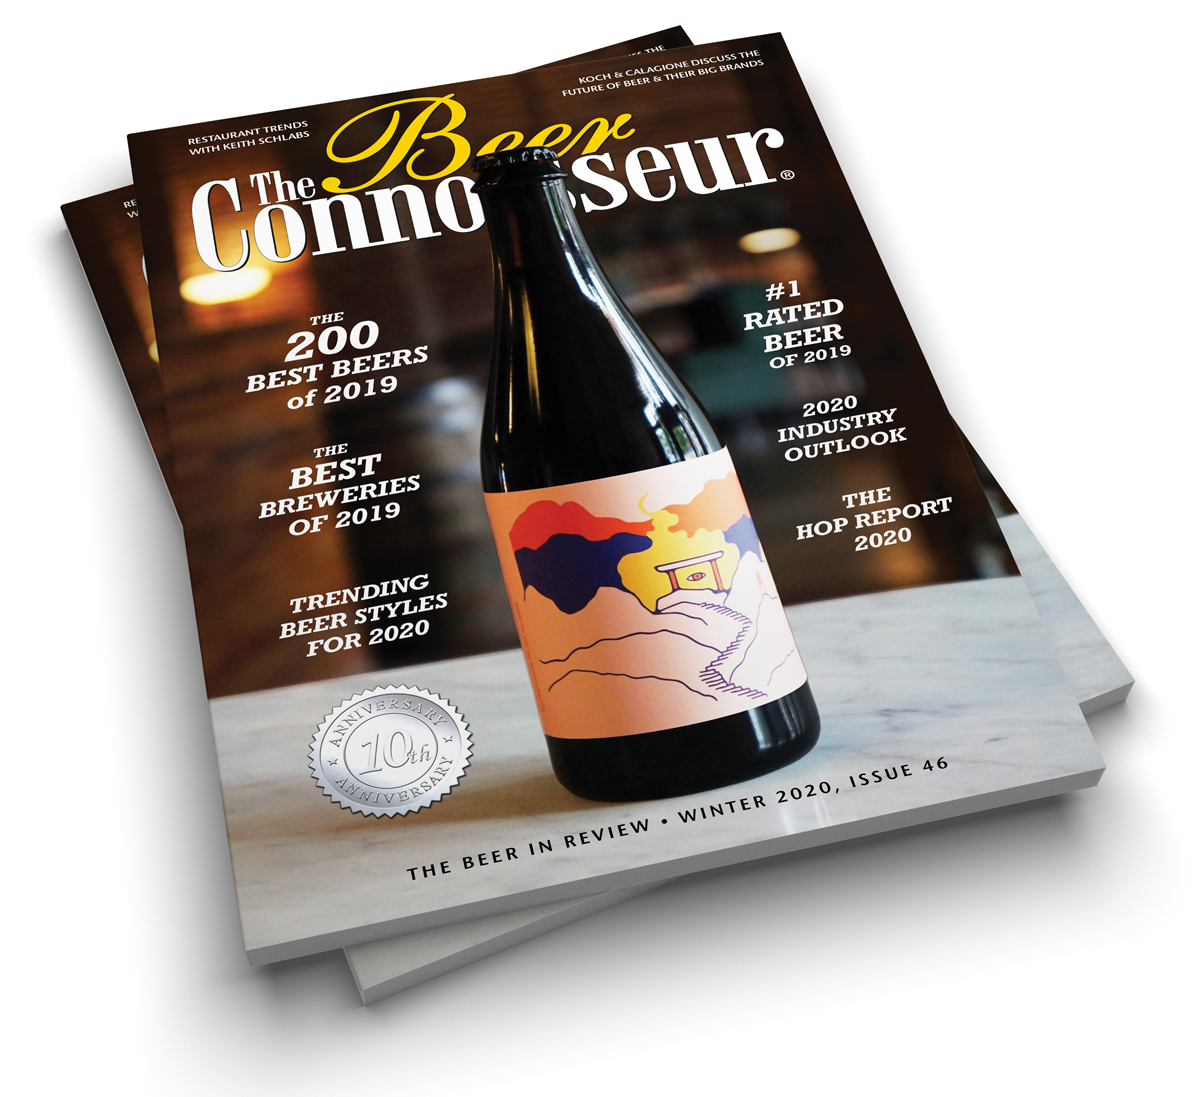 The Beer Connoissuer: WINTER 2020, ISSUE 46 (Back Edition)